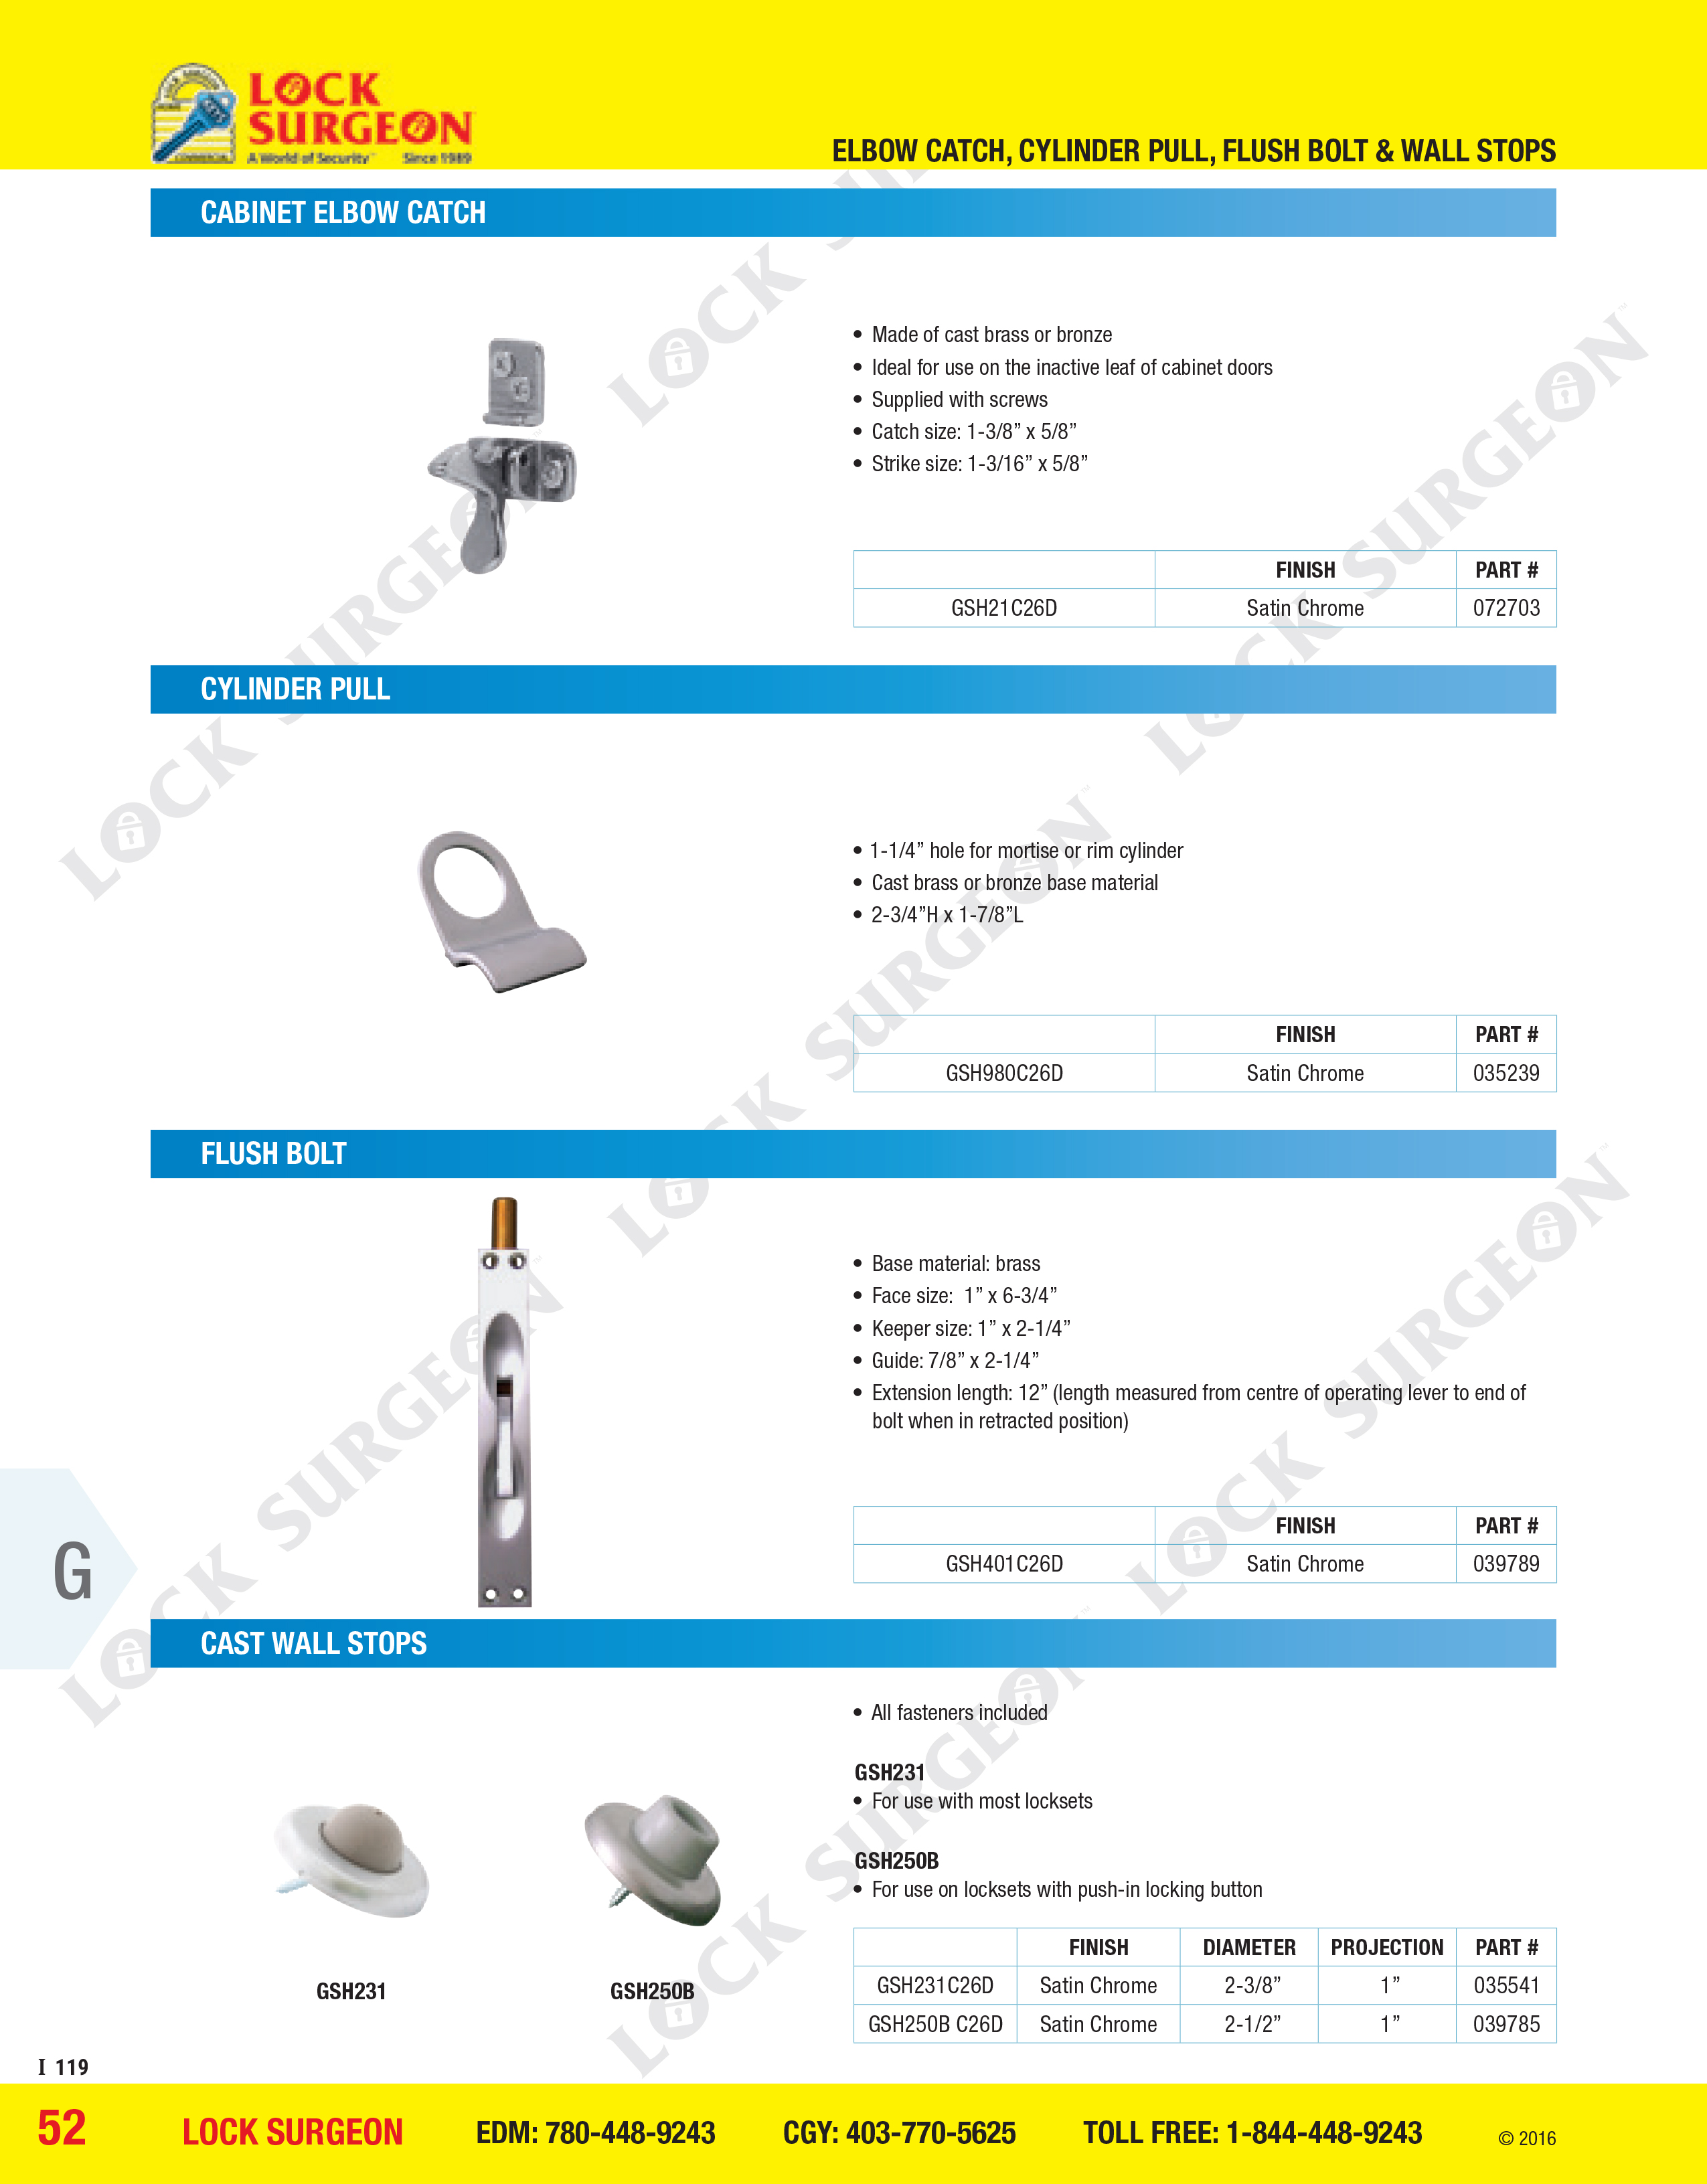 Acheson Gallery Elbow catch, Cabinet elbow catch, cylinder pull, flush bolt and cast wall stops.